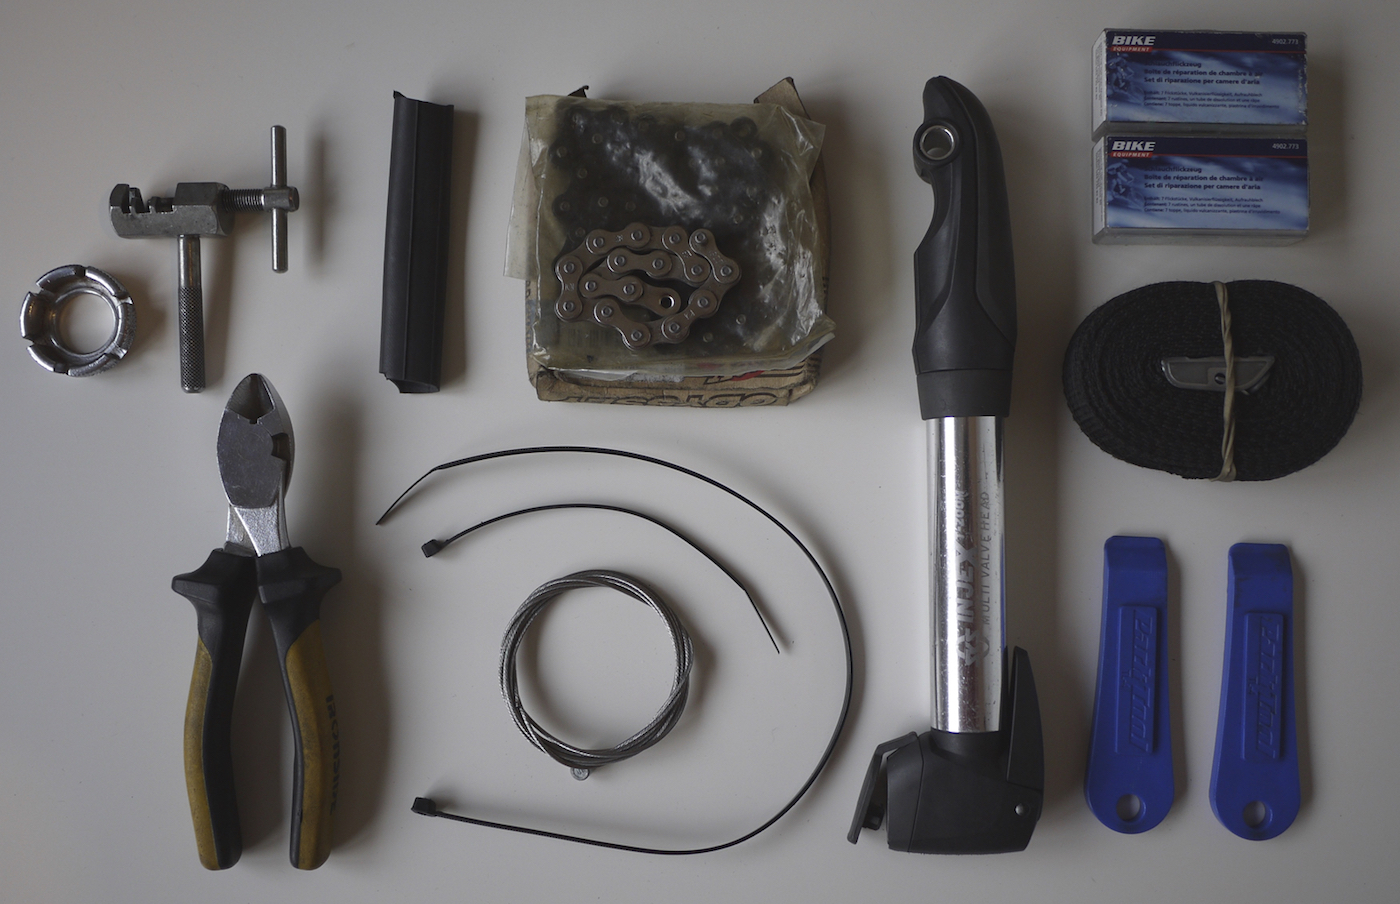 Contents of the tools bag